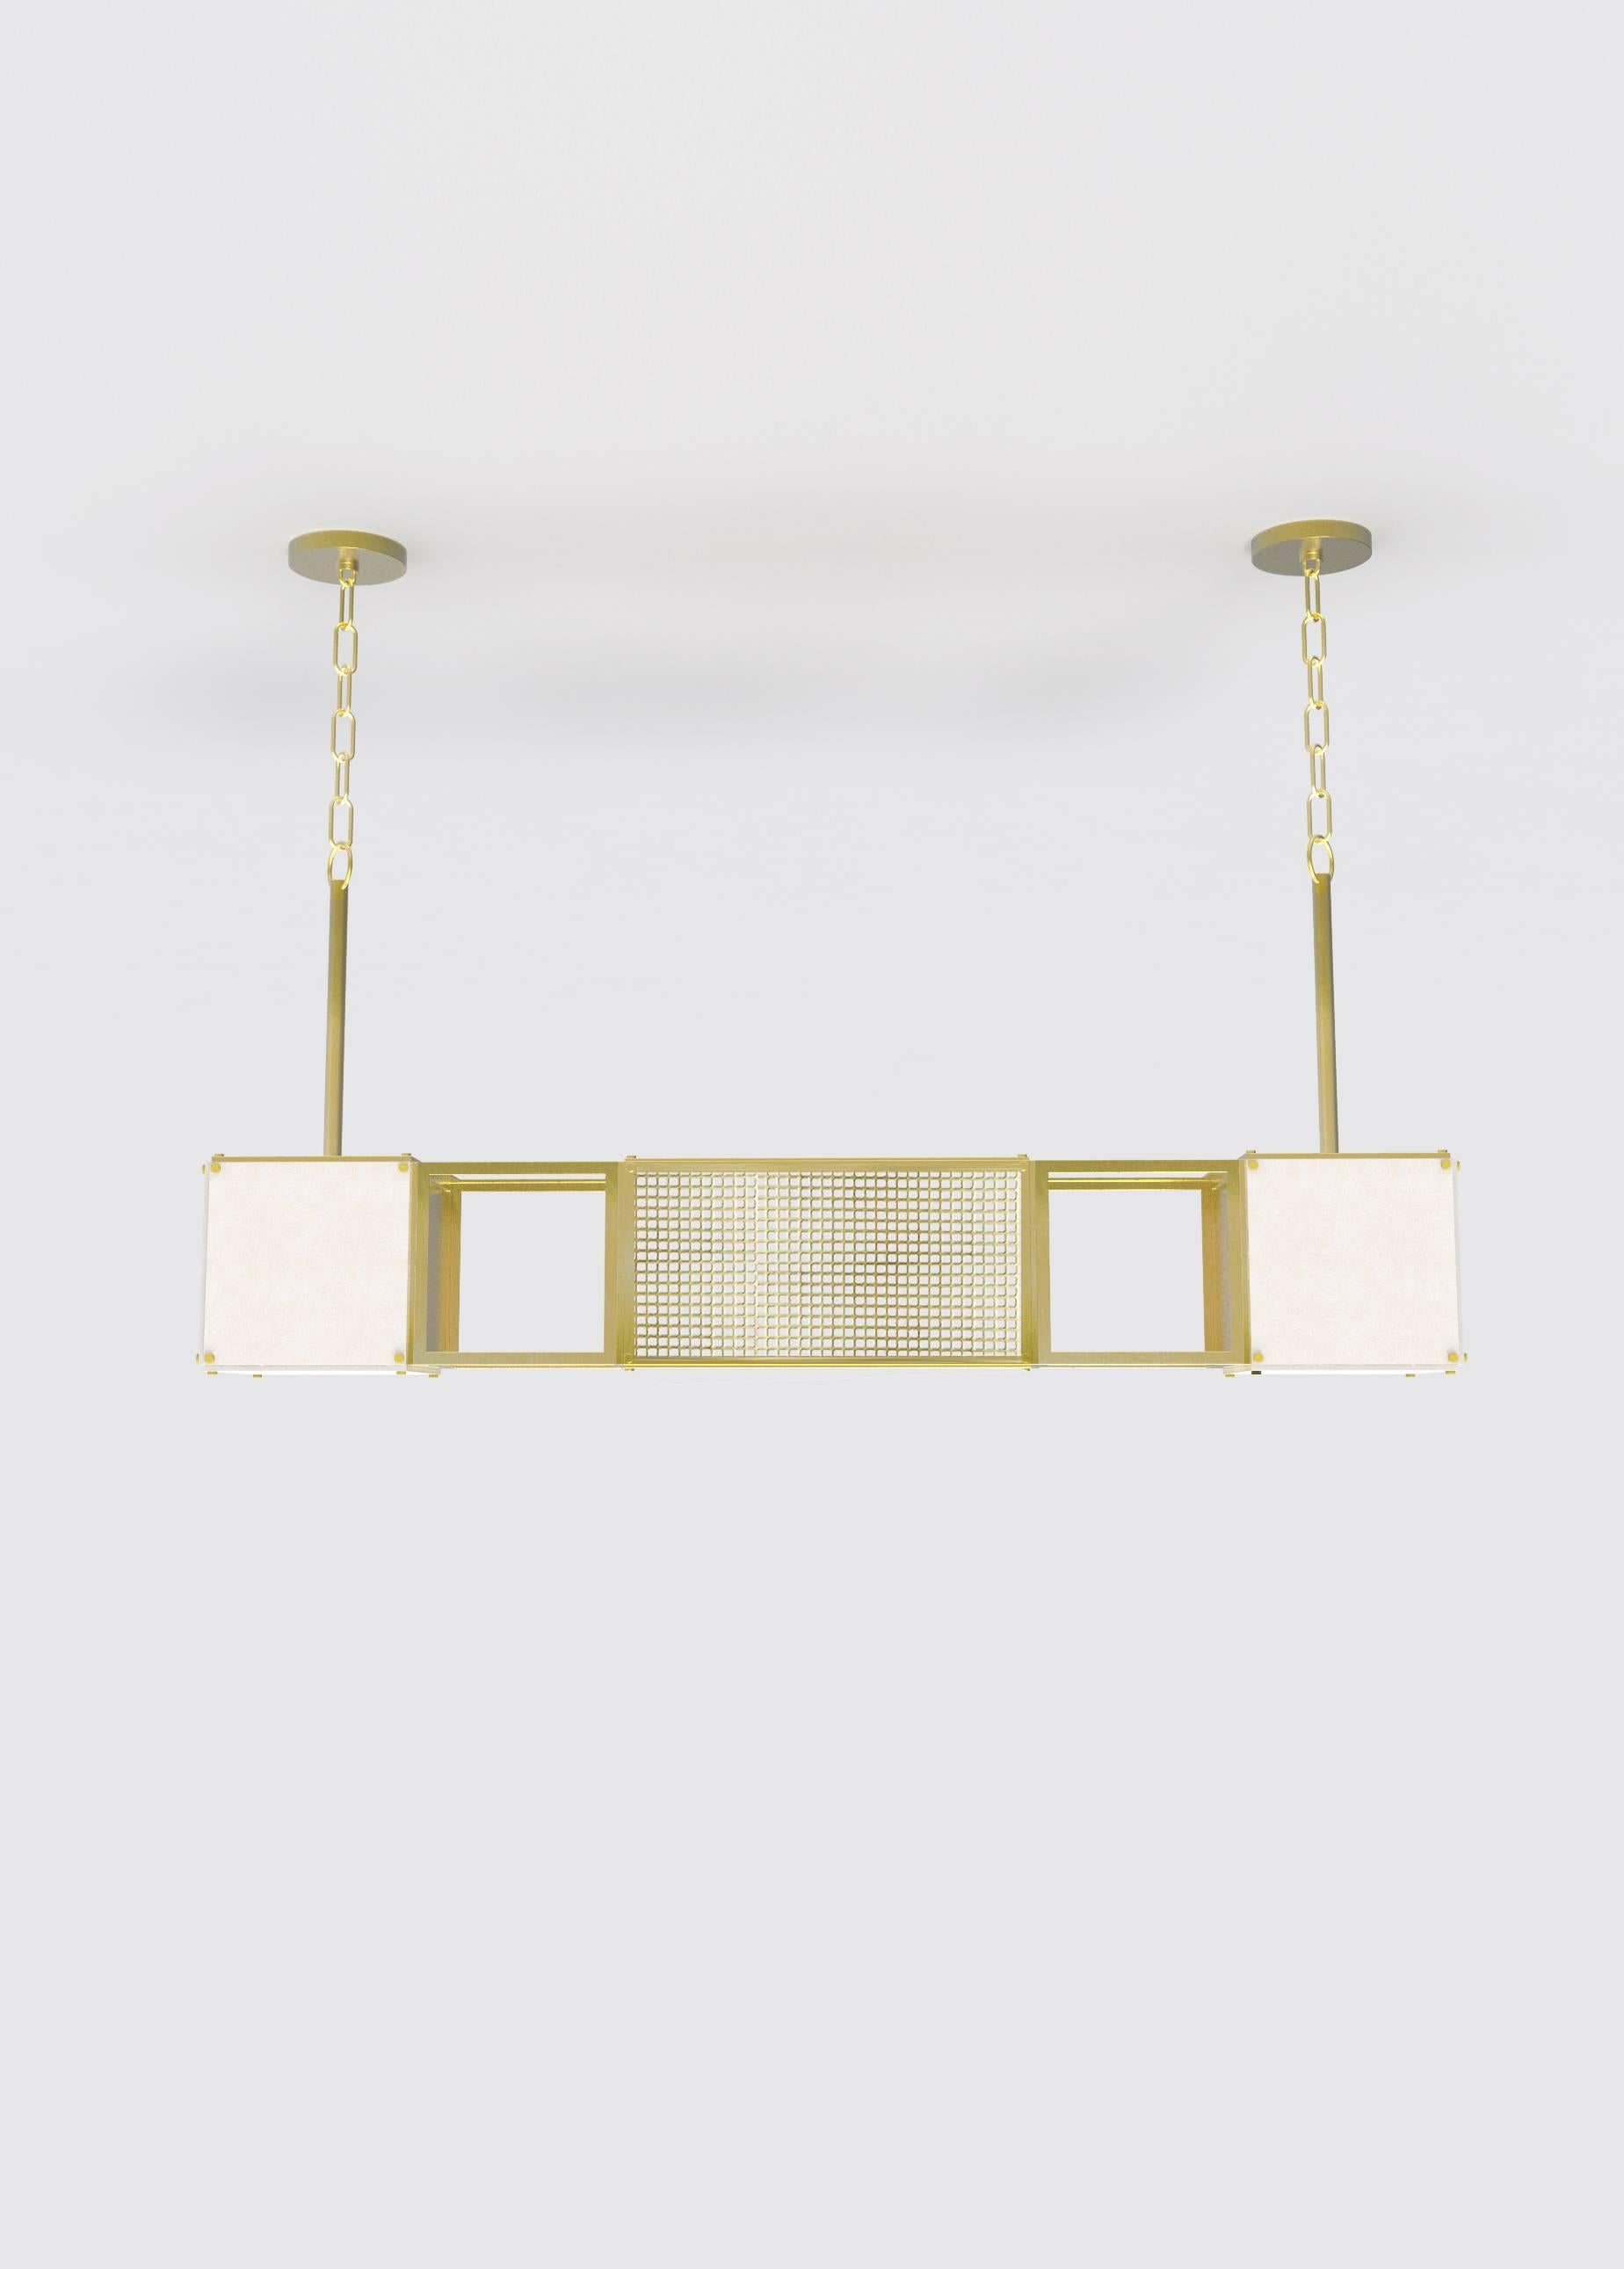 Brass Contemporary 005 Pendant in Nickel and Alabaster by Orphan Work, 2018 For Sale